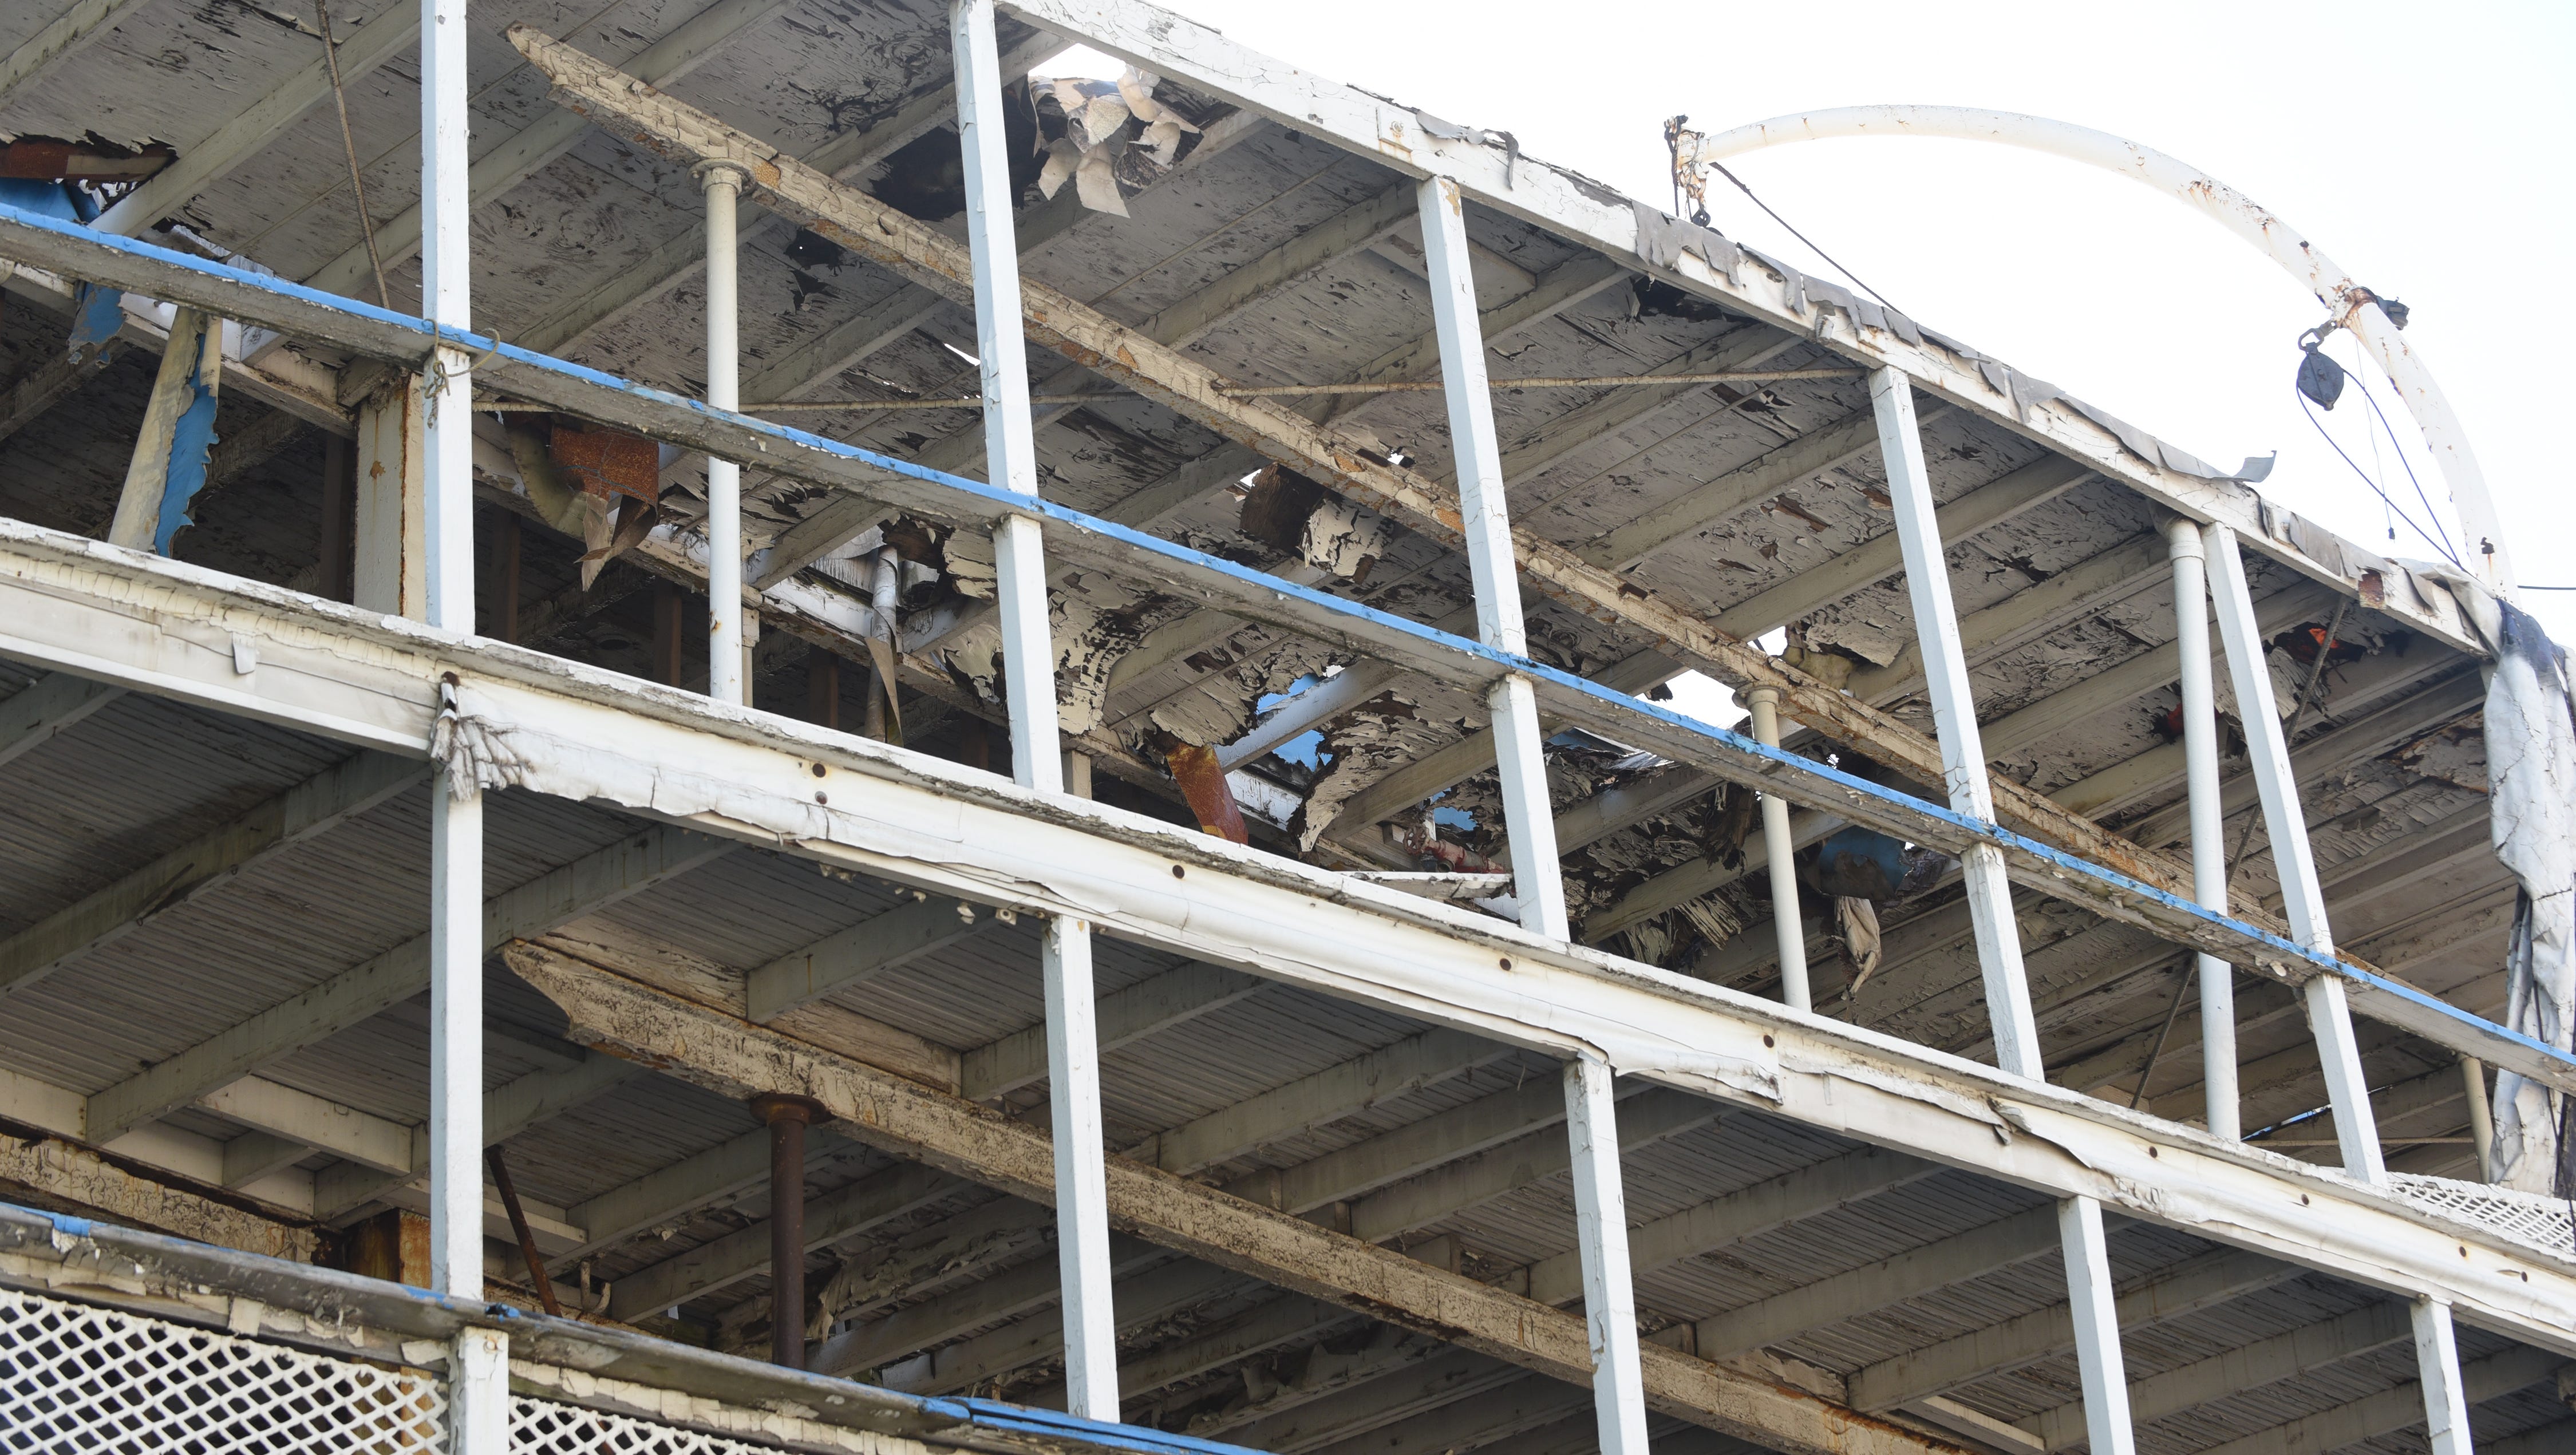 The upper decks of the boat show   deterioration.